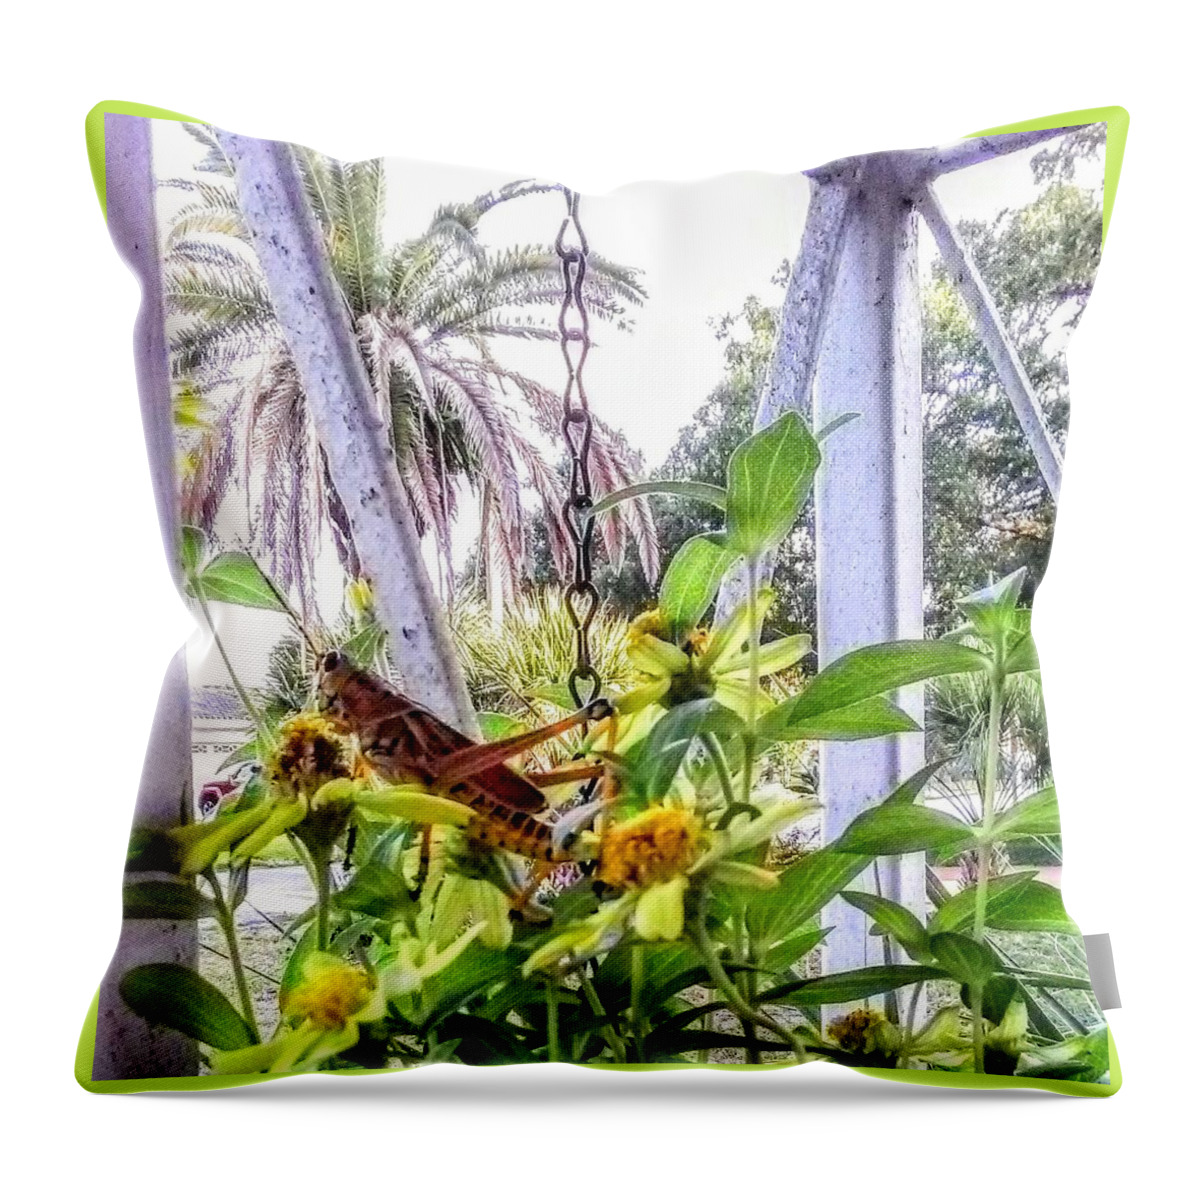 Grasshopper Throw Pillow featuring the photograph Contemplating by Suzanne Berthier